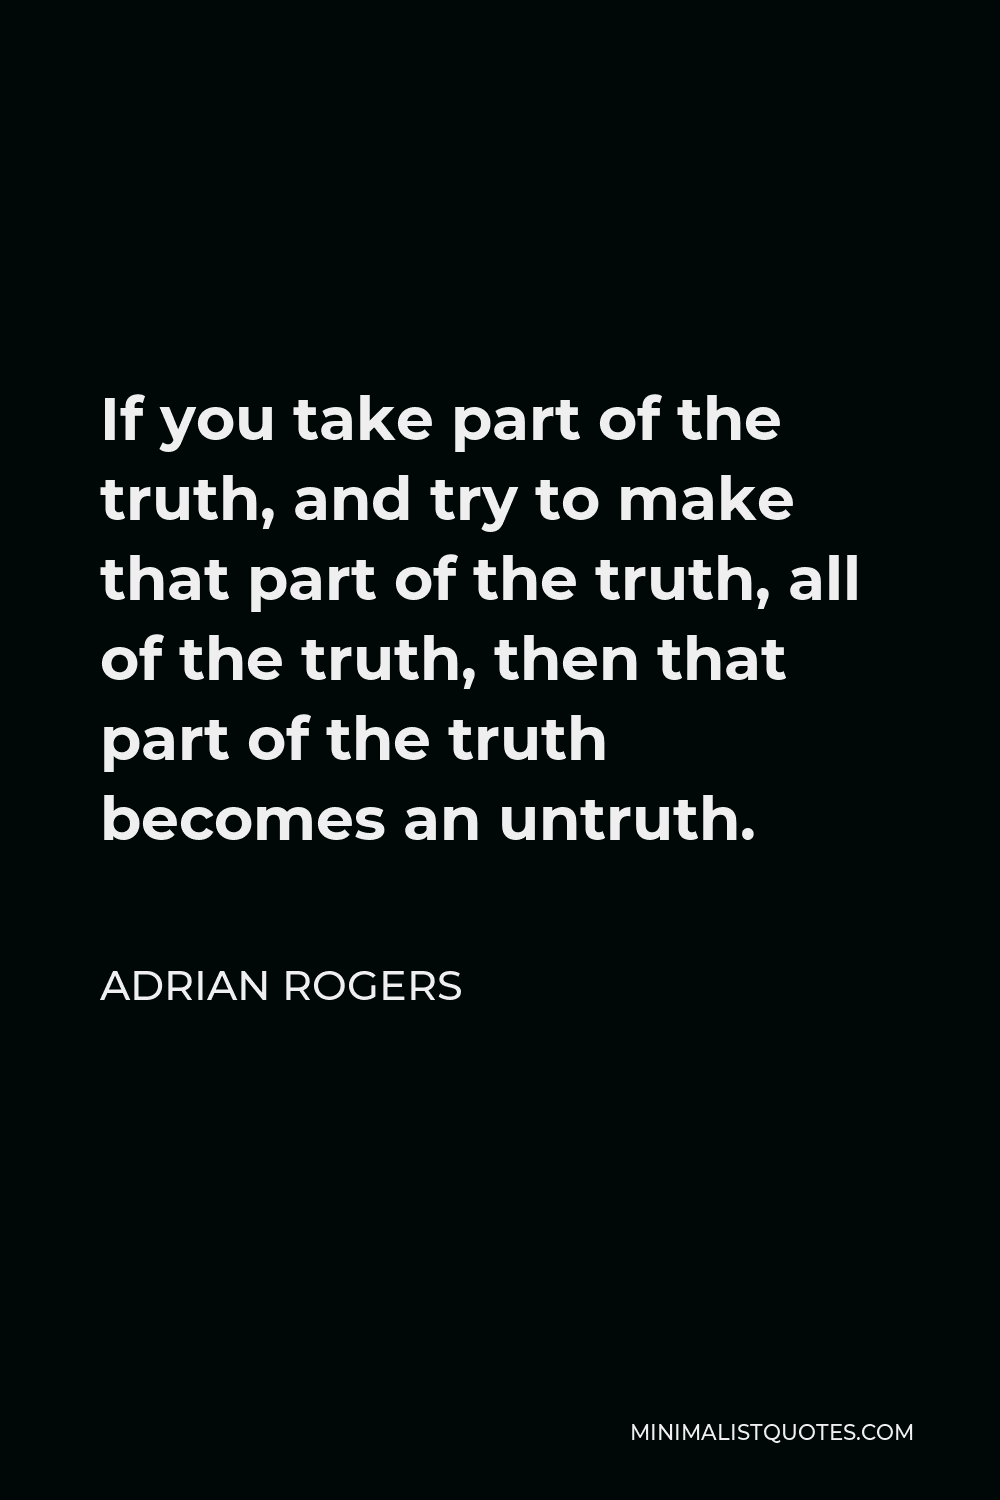 Adrian Rogers Quote - If you take part of the truth, and try to make that part of the truth, all of the truth, then that part of the truth becomes an untruth.